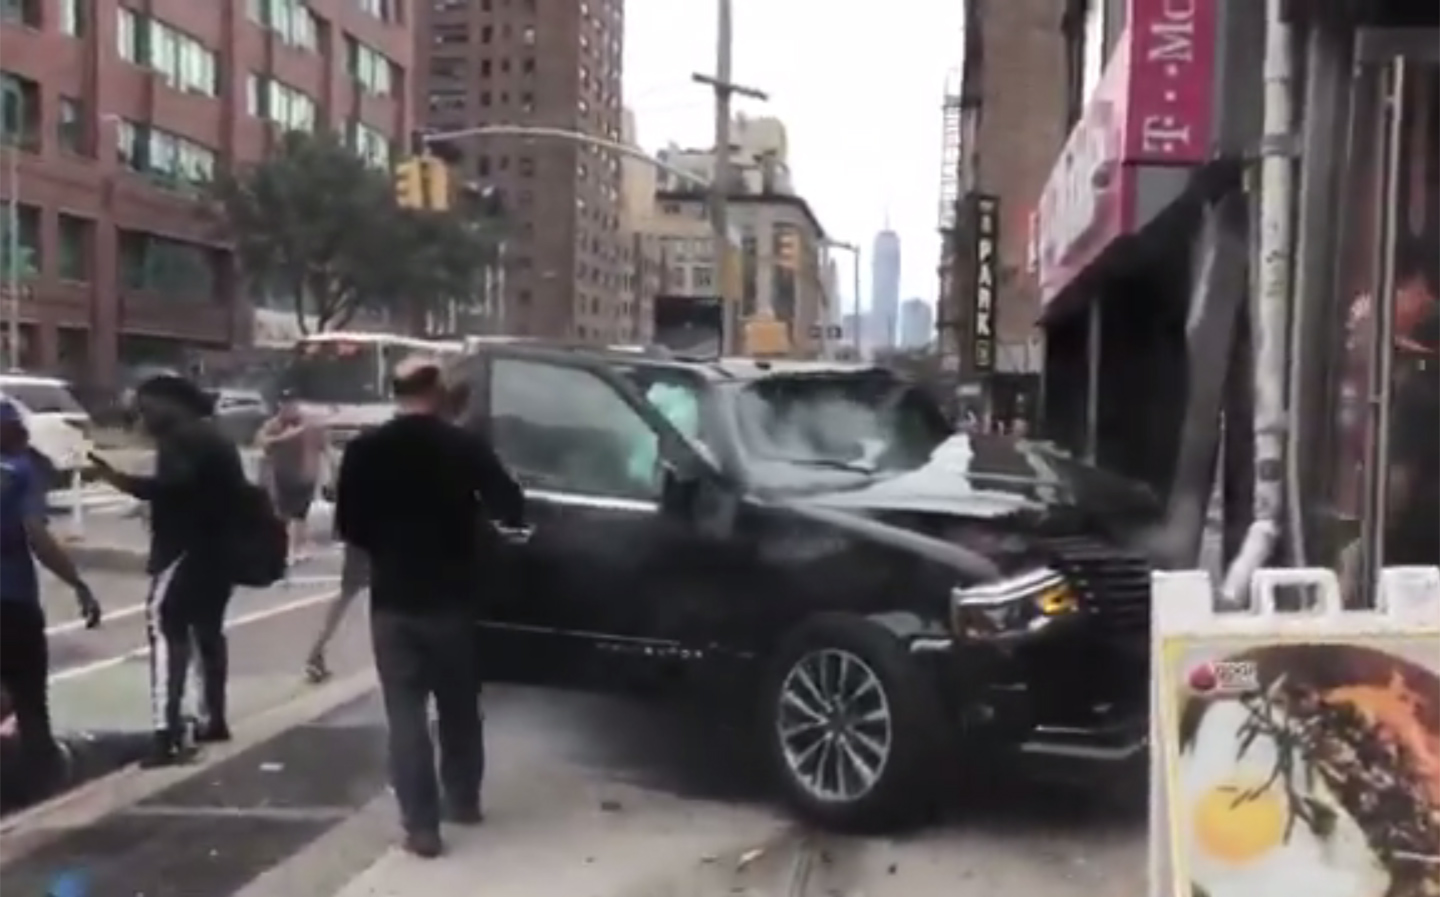 Private hire SUV smashes into storefront in New York